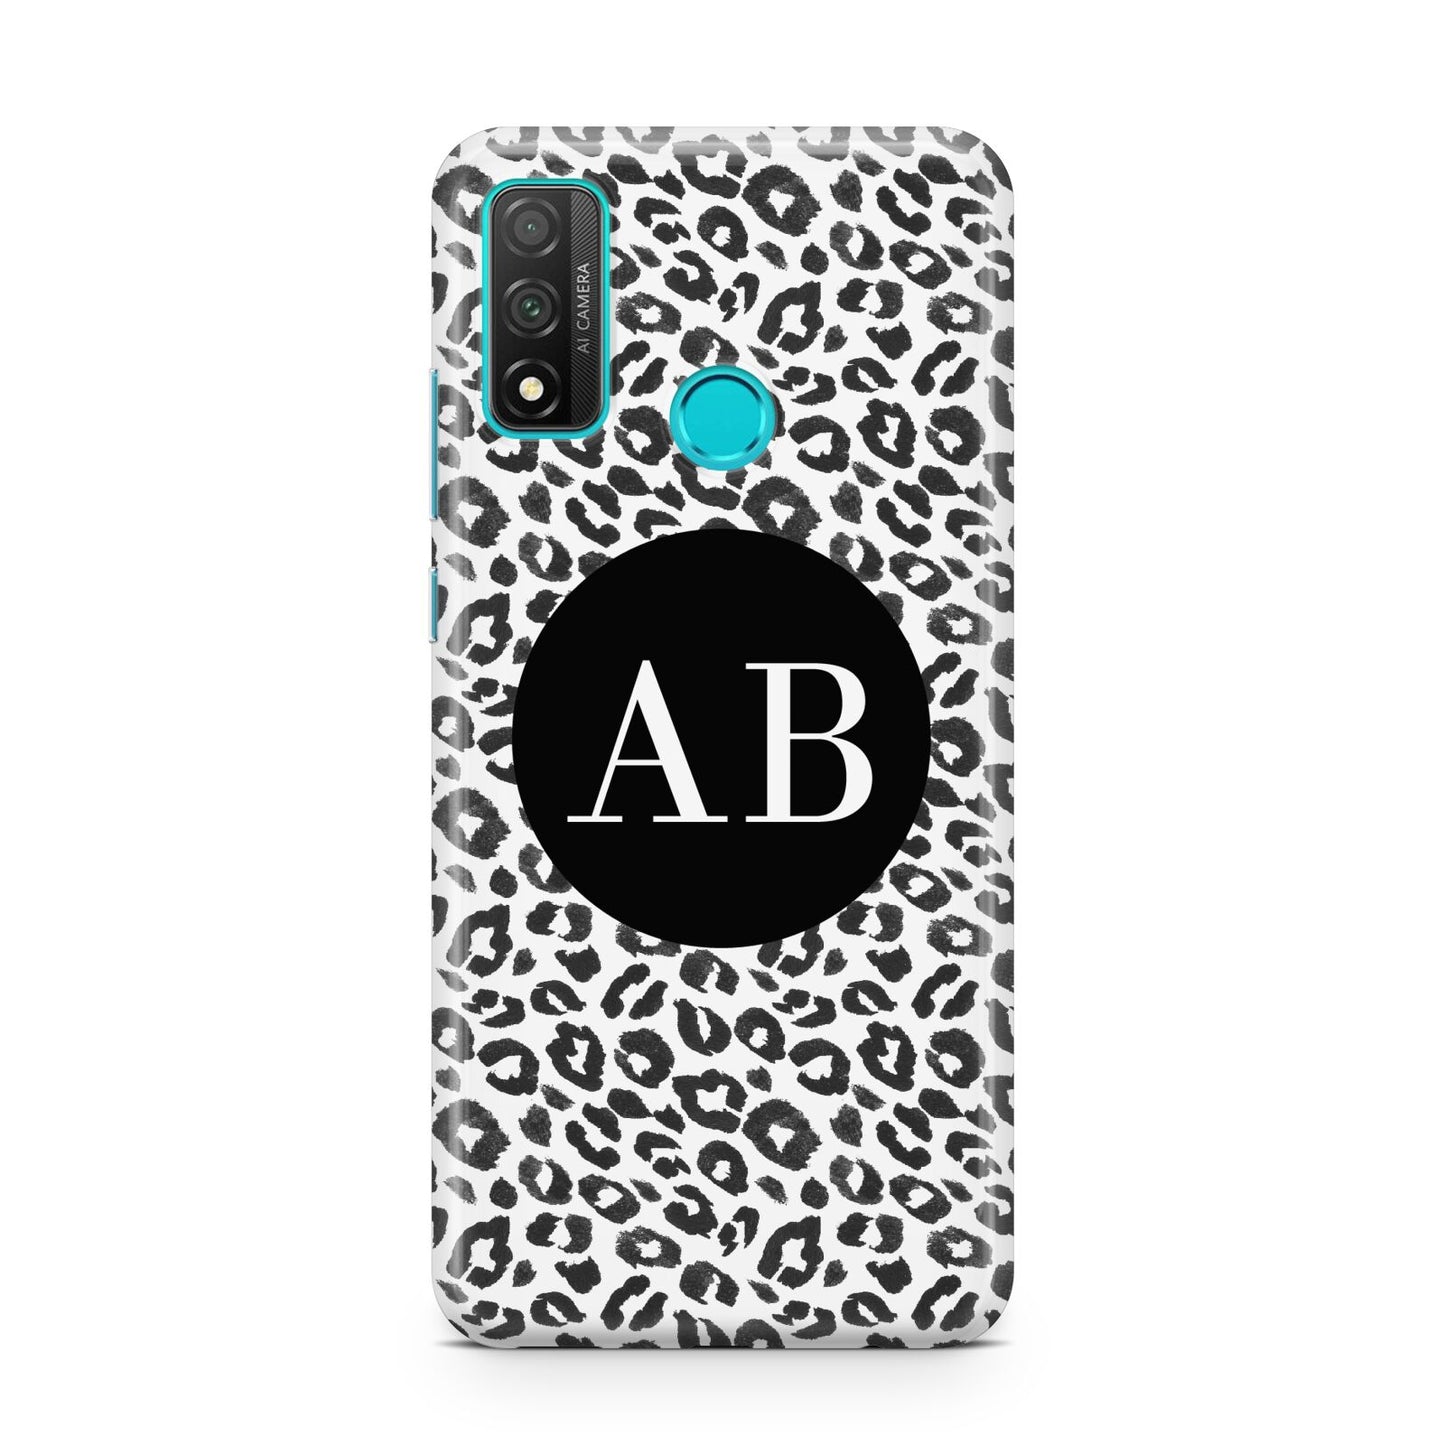 Leopard Print Black and White Huawei P Smart 2020